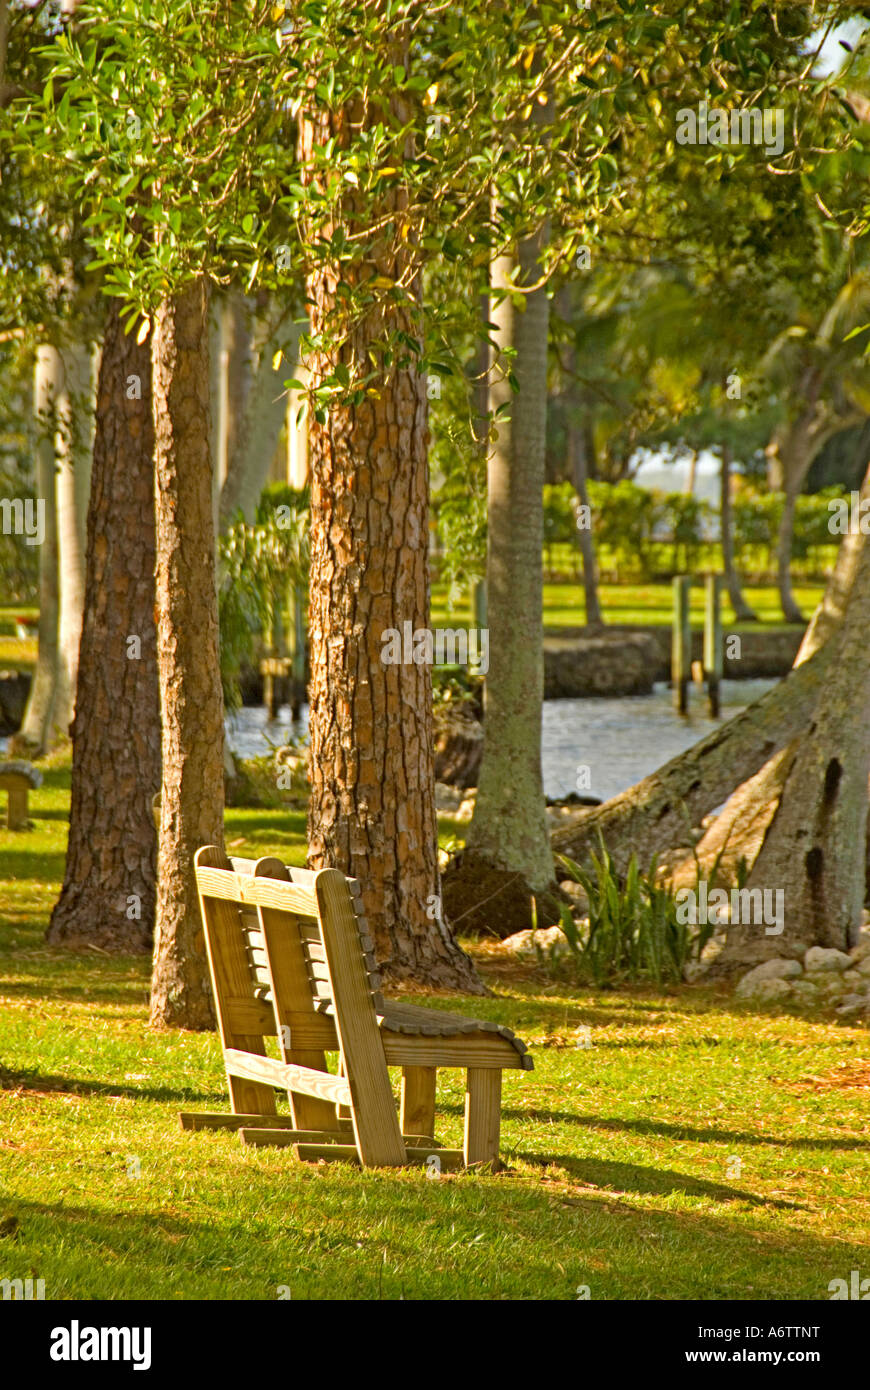 Thomas Edison winter home estate Fort Myers Florida botanical garden with a  bench by the Caloosahatchee River Stock Photo